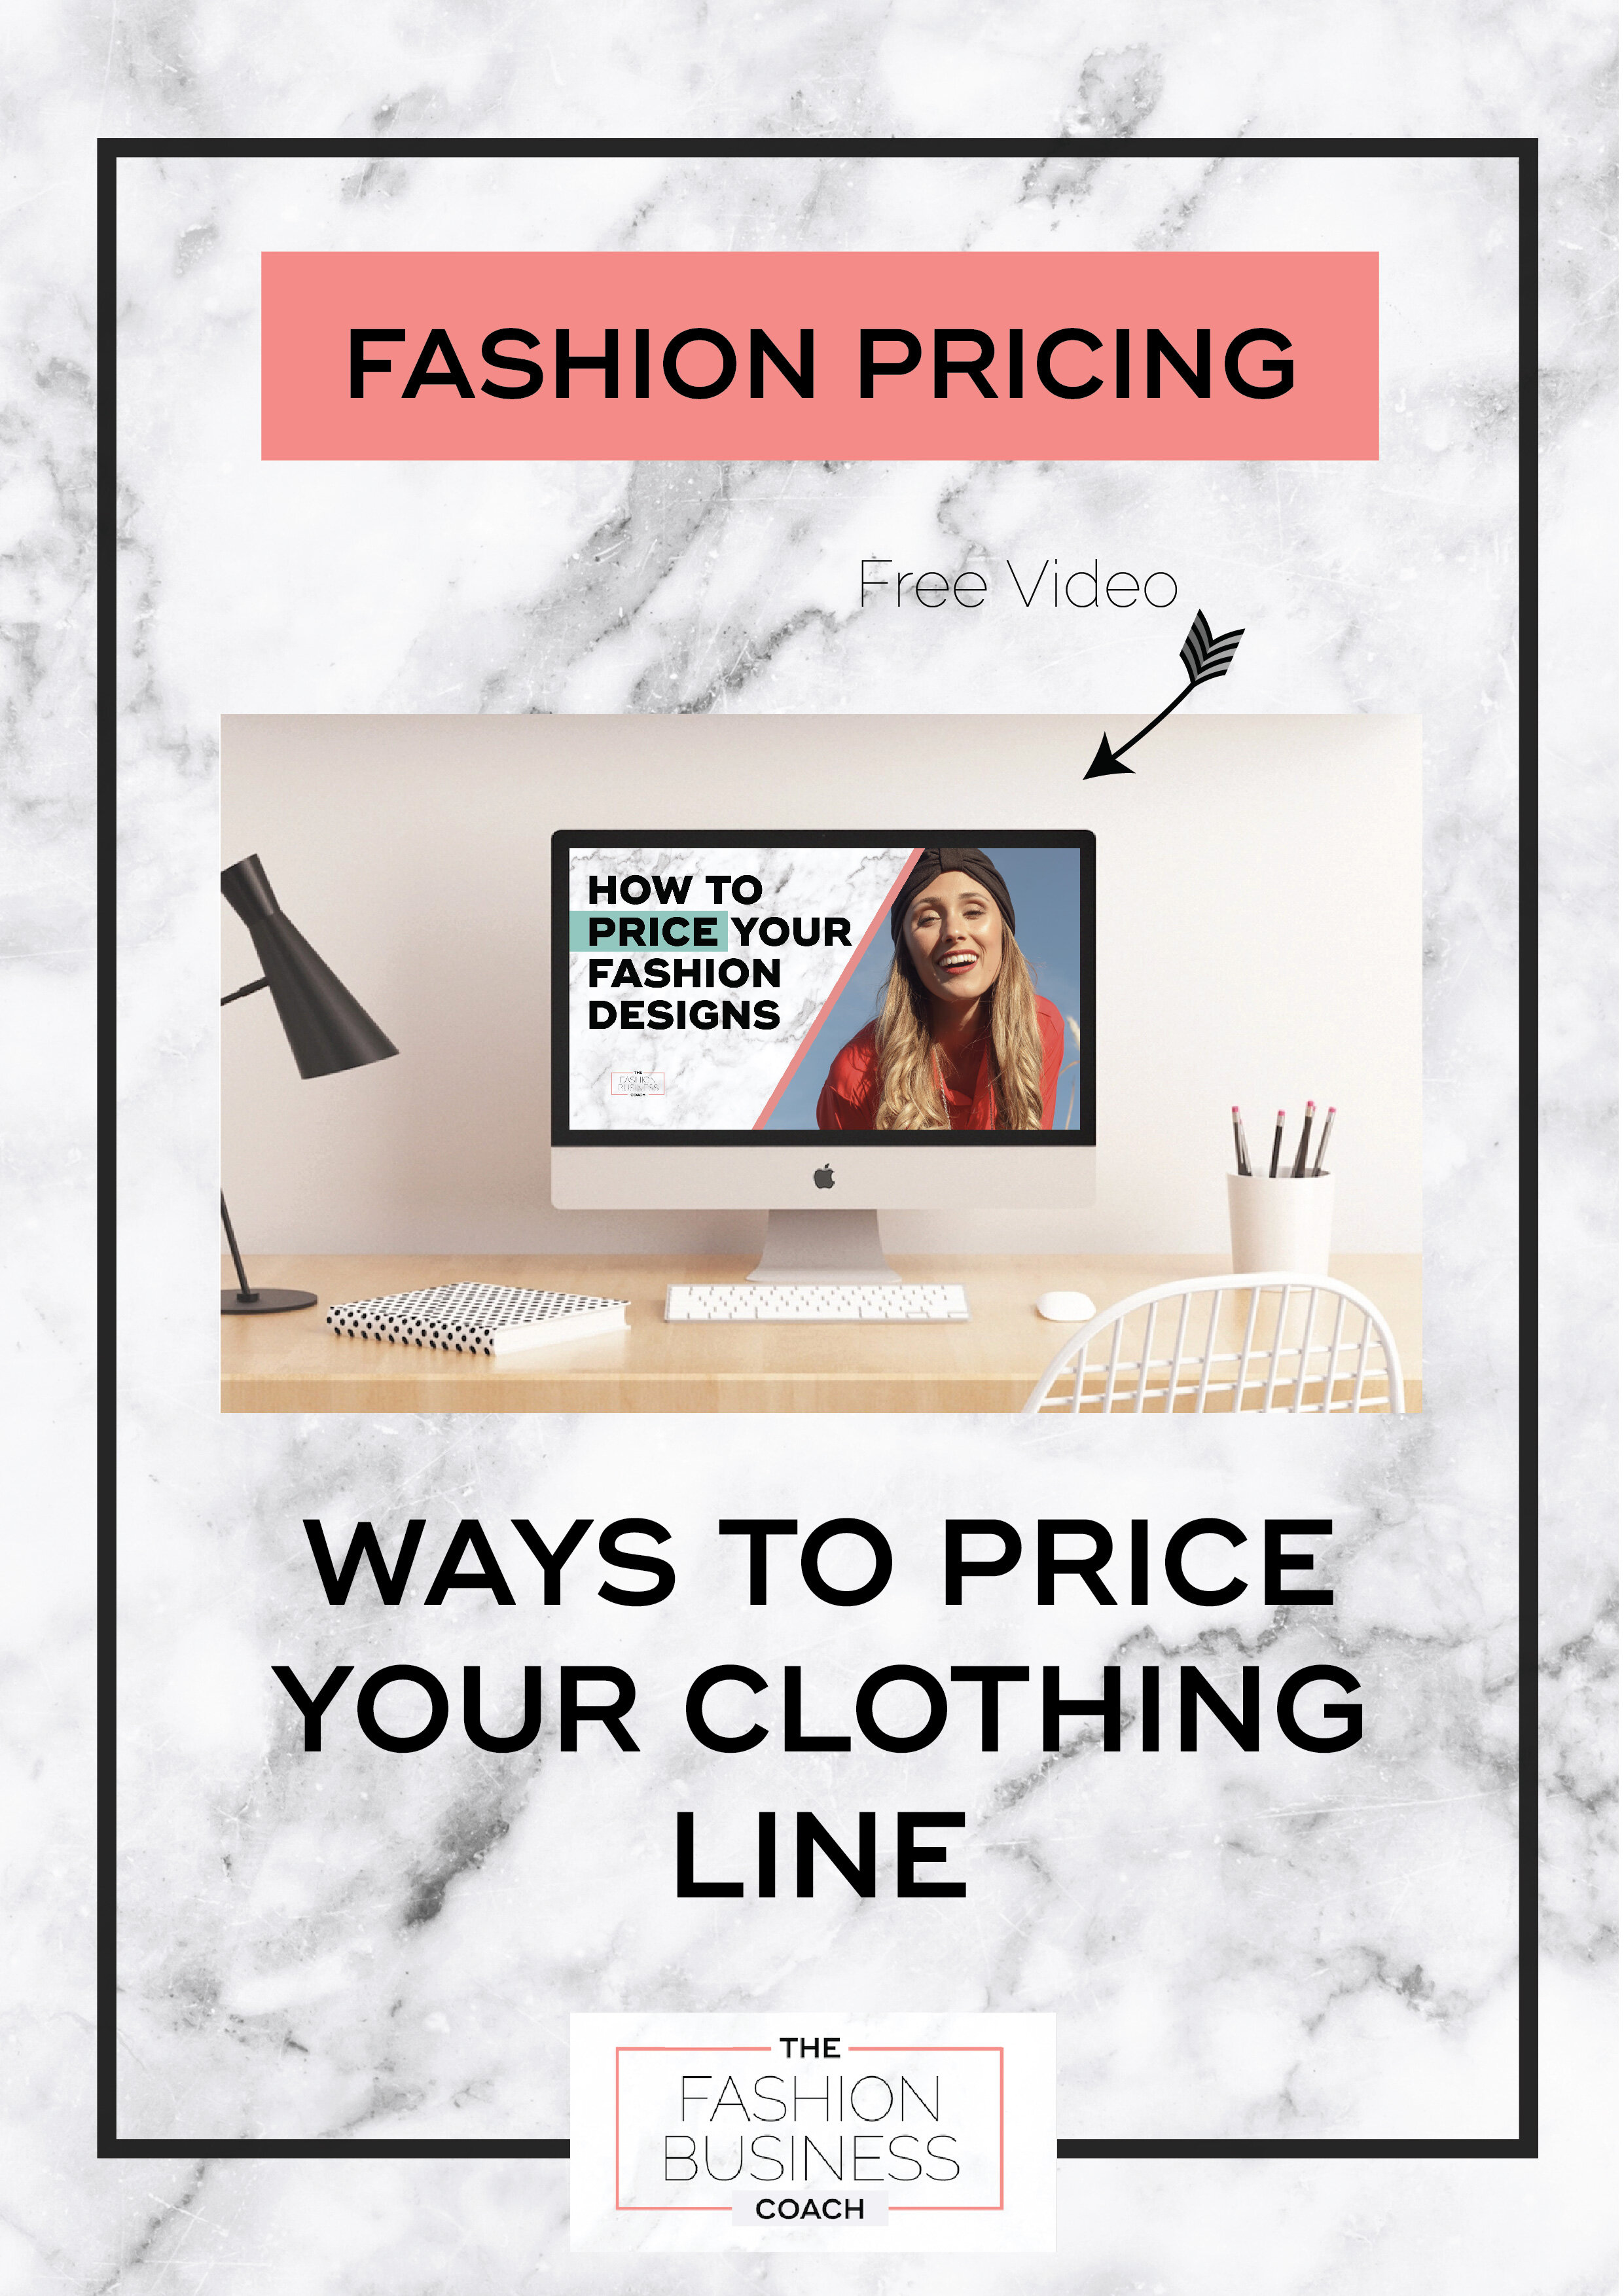 Fashion pricing Ways to price your clothing line1.jpg